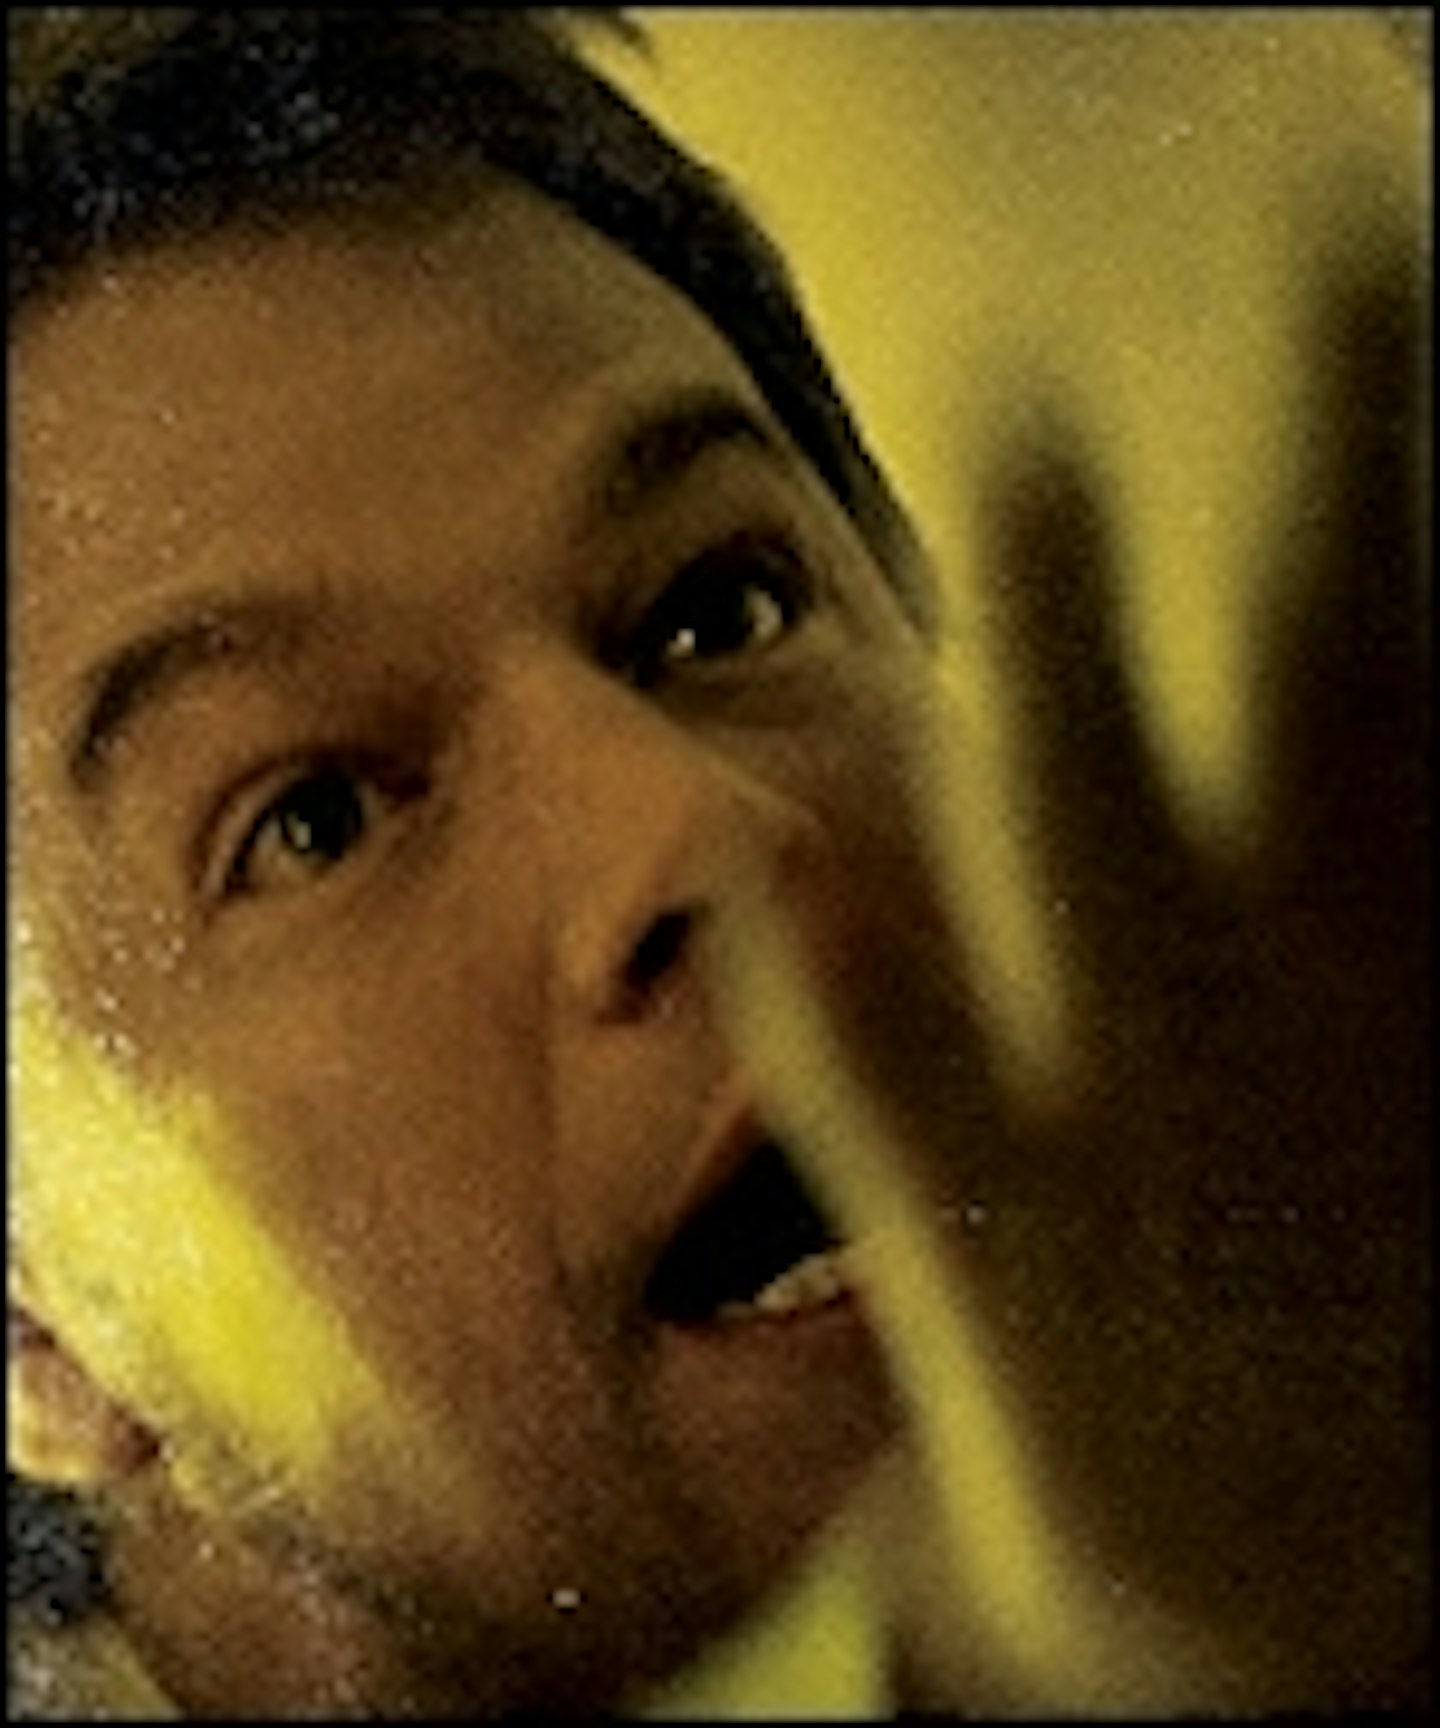 Contagion Character Posters Online